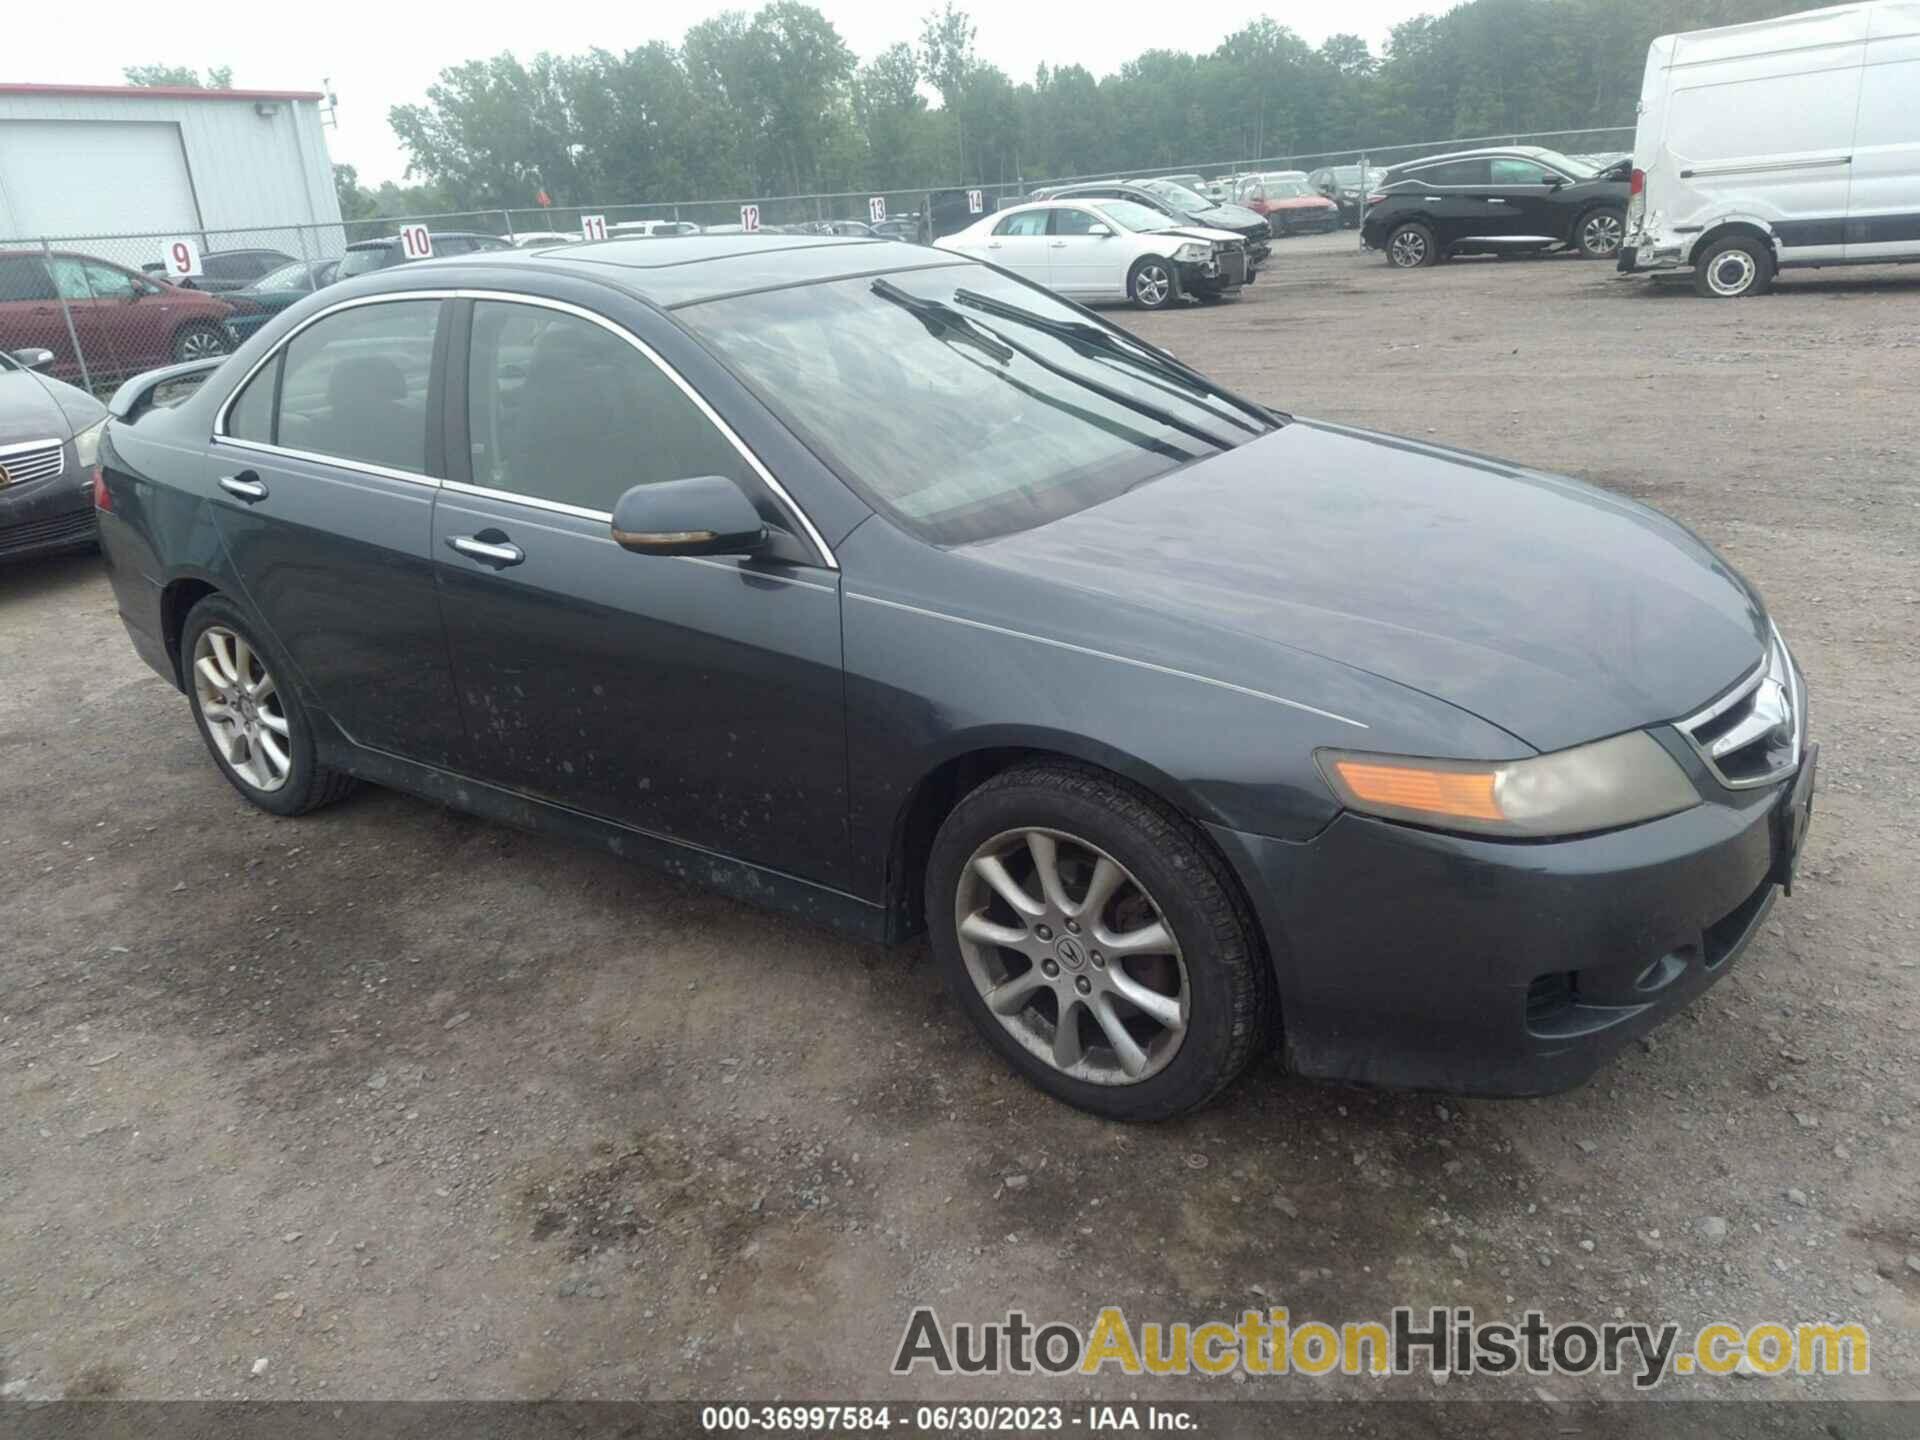 ACURA TSX, JH4CL96848C001456